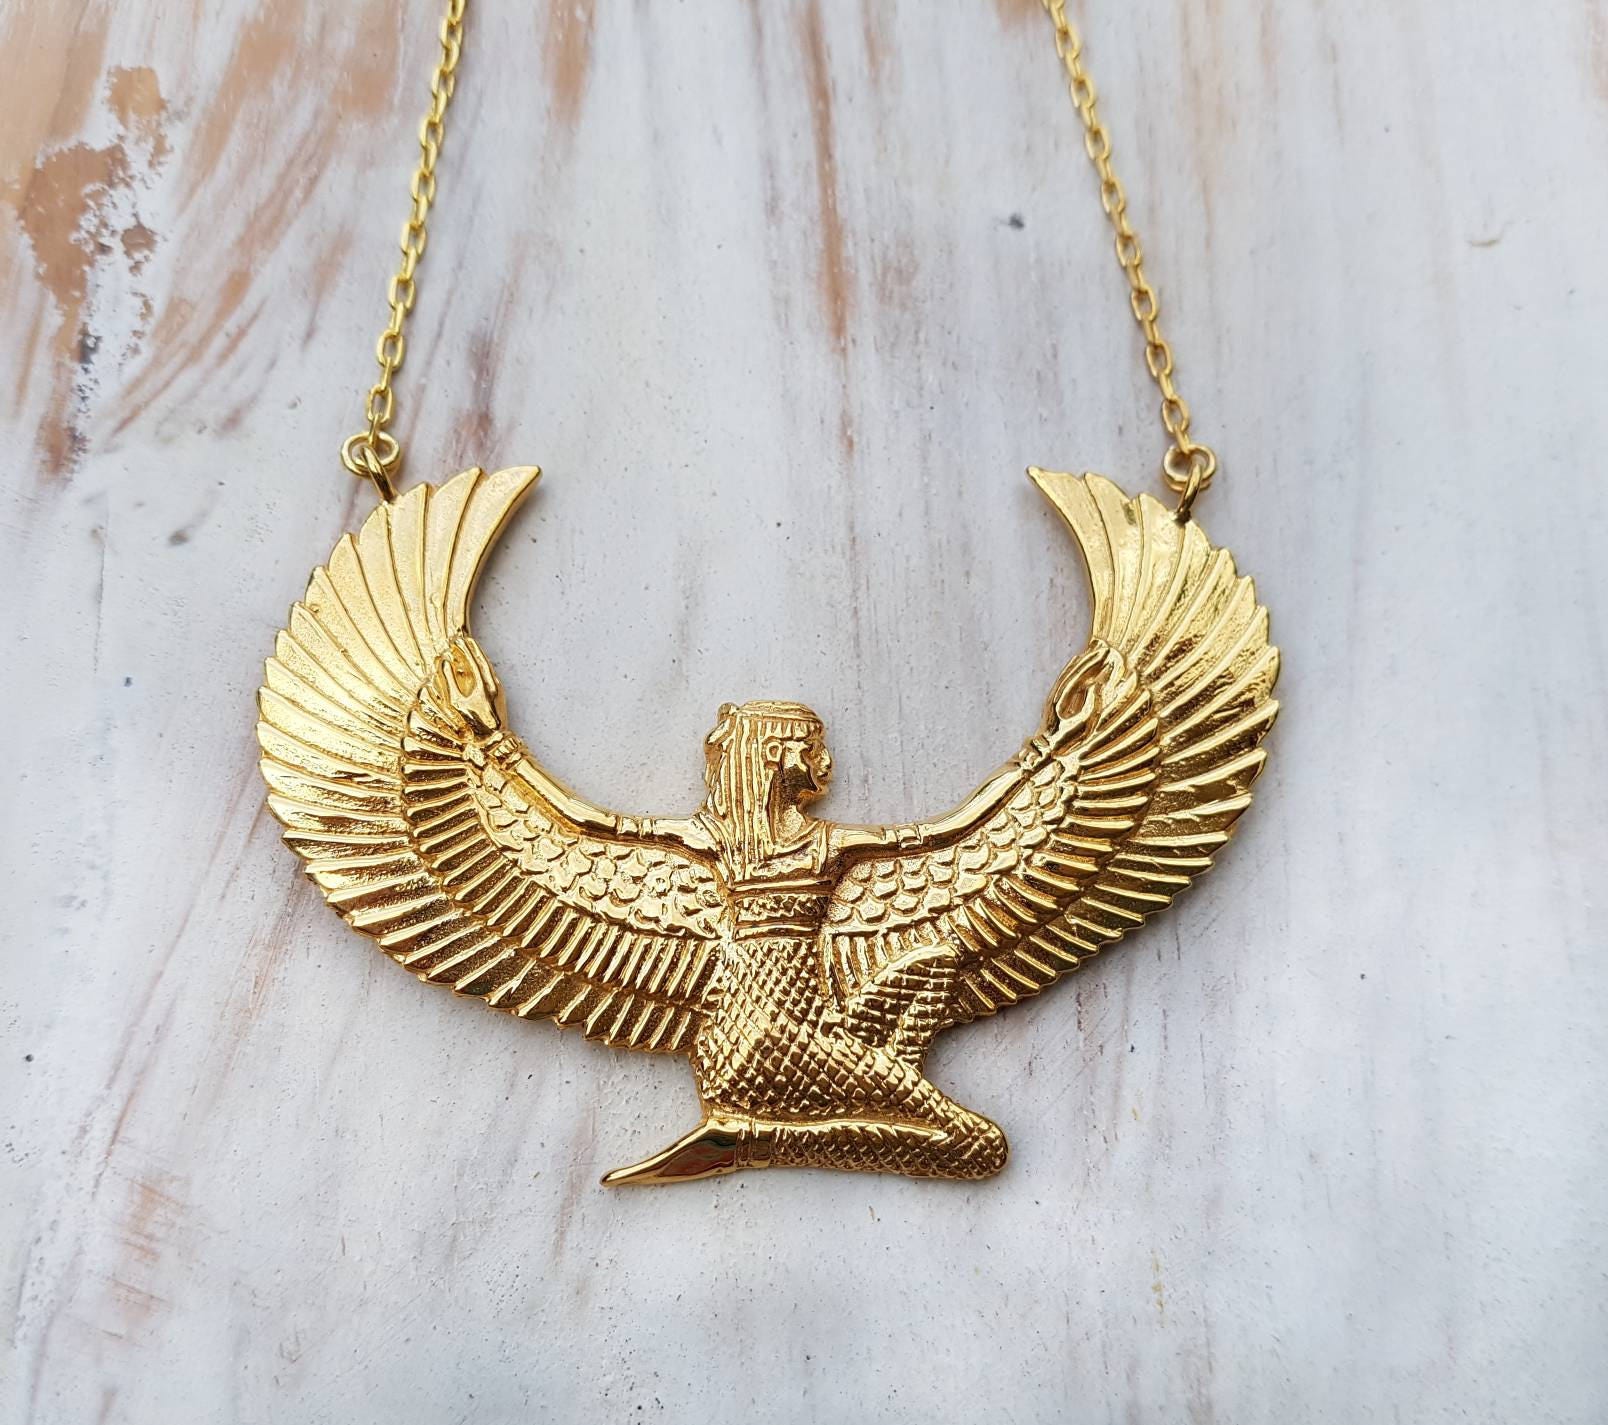 24Ct Gold Dipped Auset Ma'at Egyptian Goddess Isis Necklace - Medium